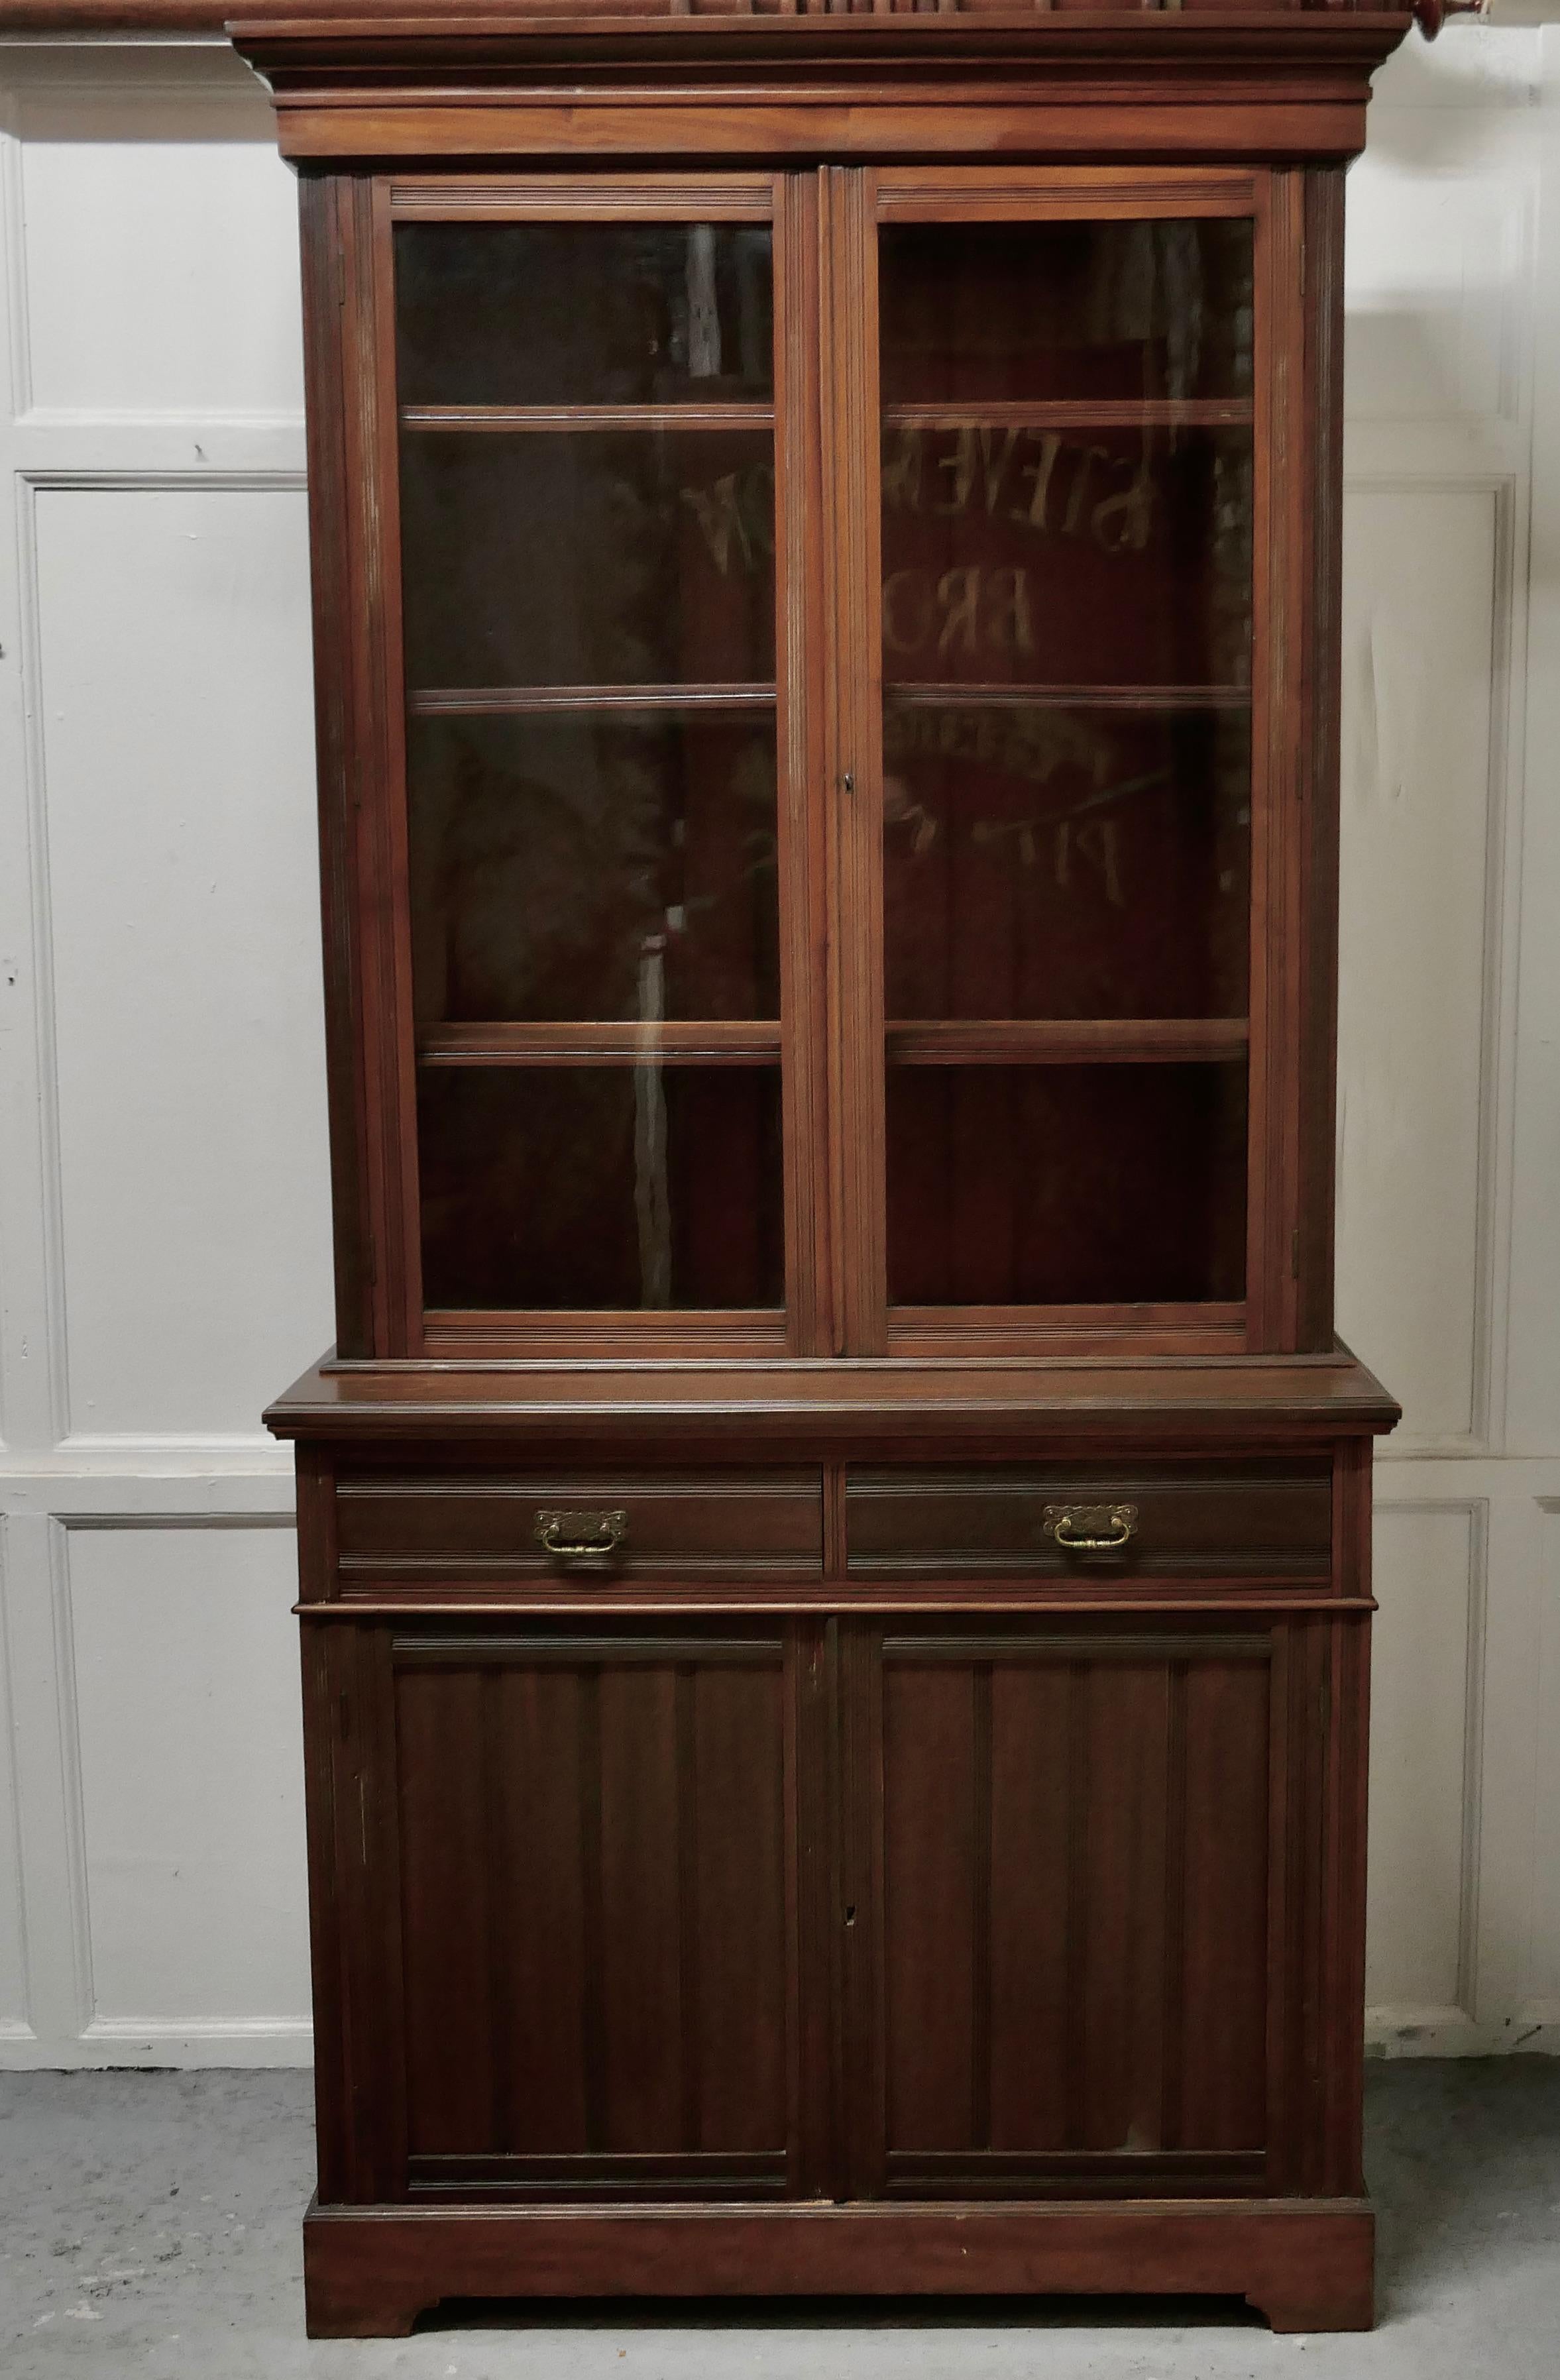 An Edwardian walnut bookcase
 
The top section of the cupboard has two glazed doors enclosing three adjustable shelves and it has an elegant outward sweeping cornice to top it off
The base of the cupboard has two drawers and beneath another